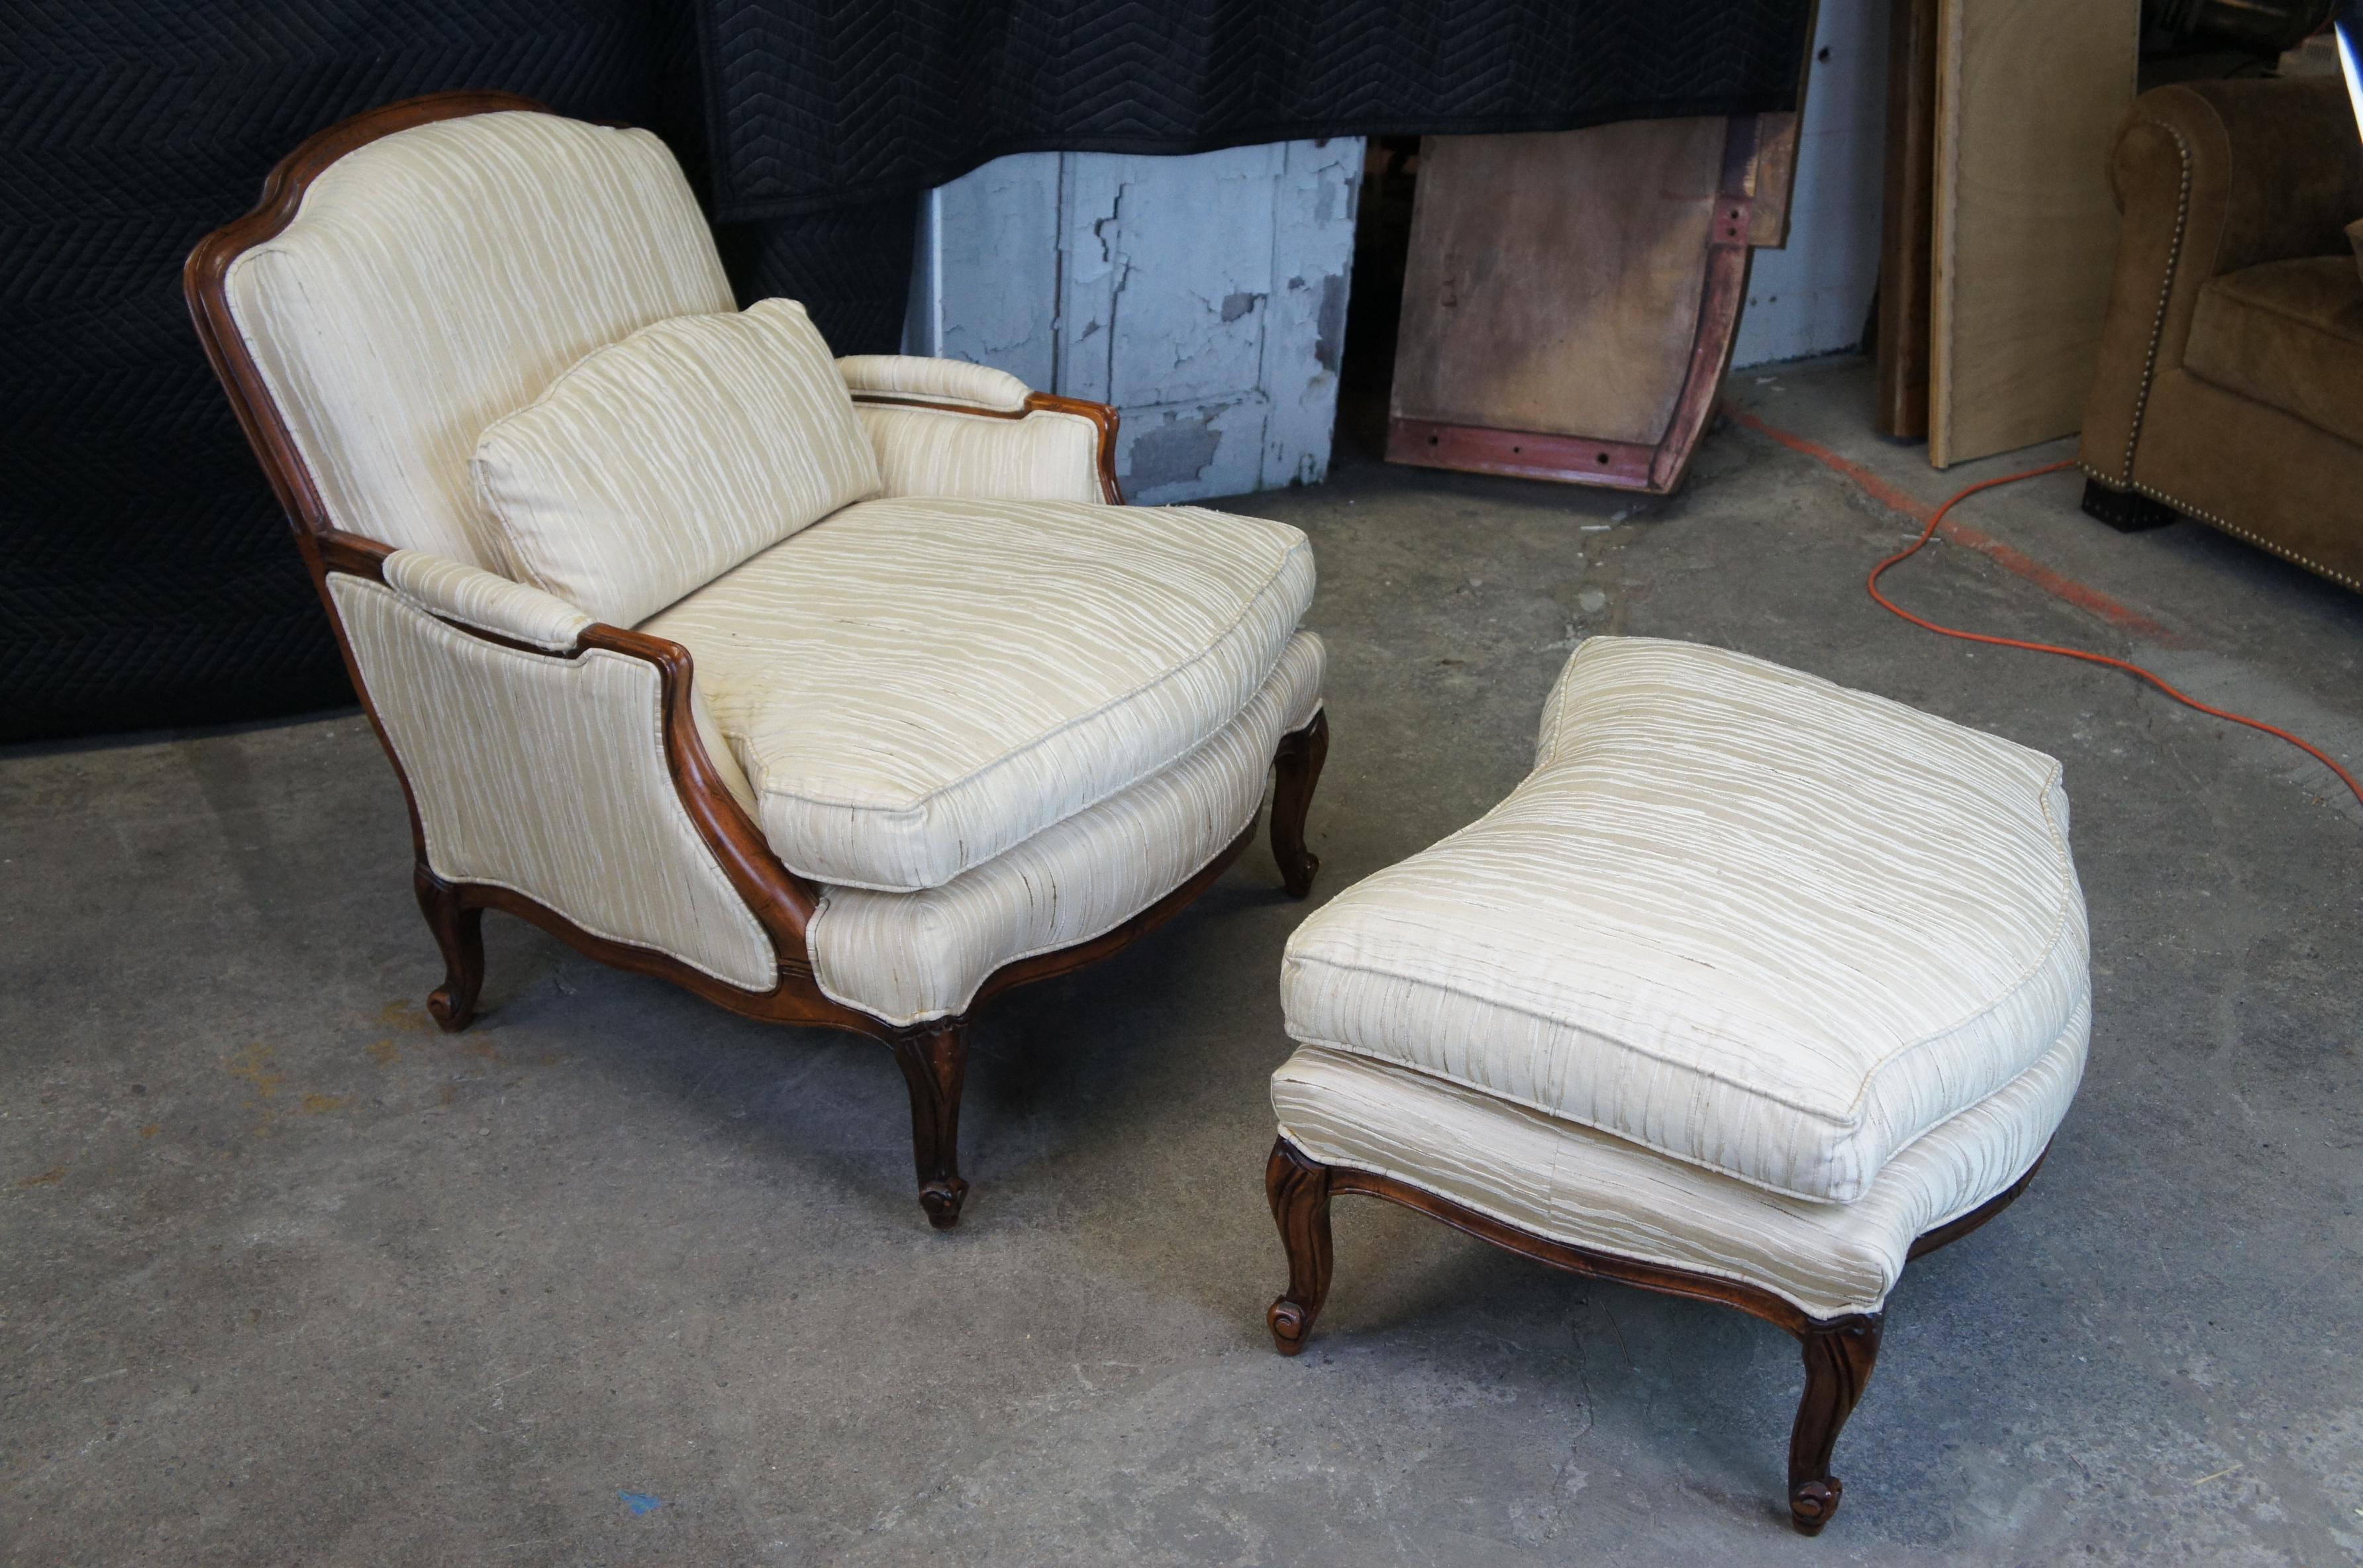 bergere chair and ottoman